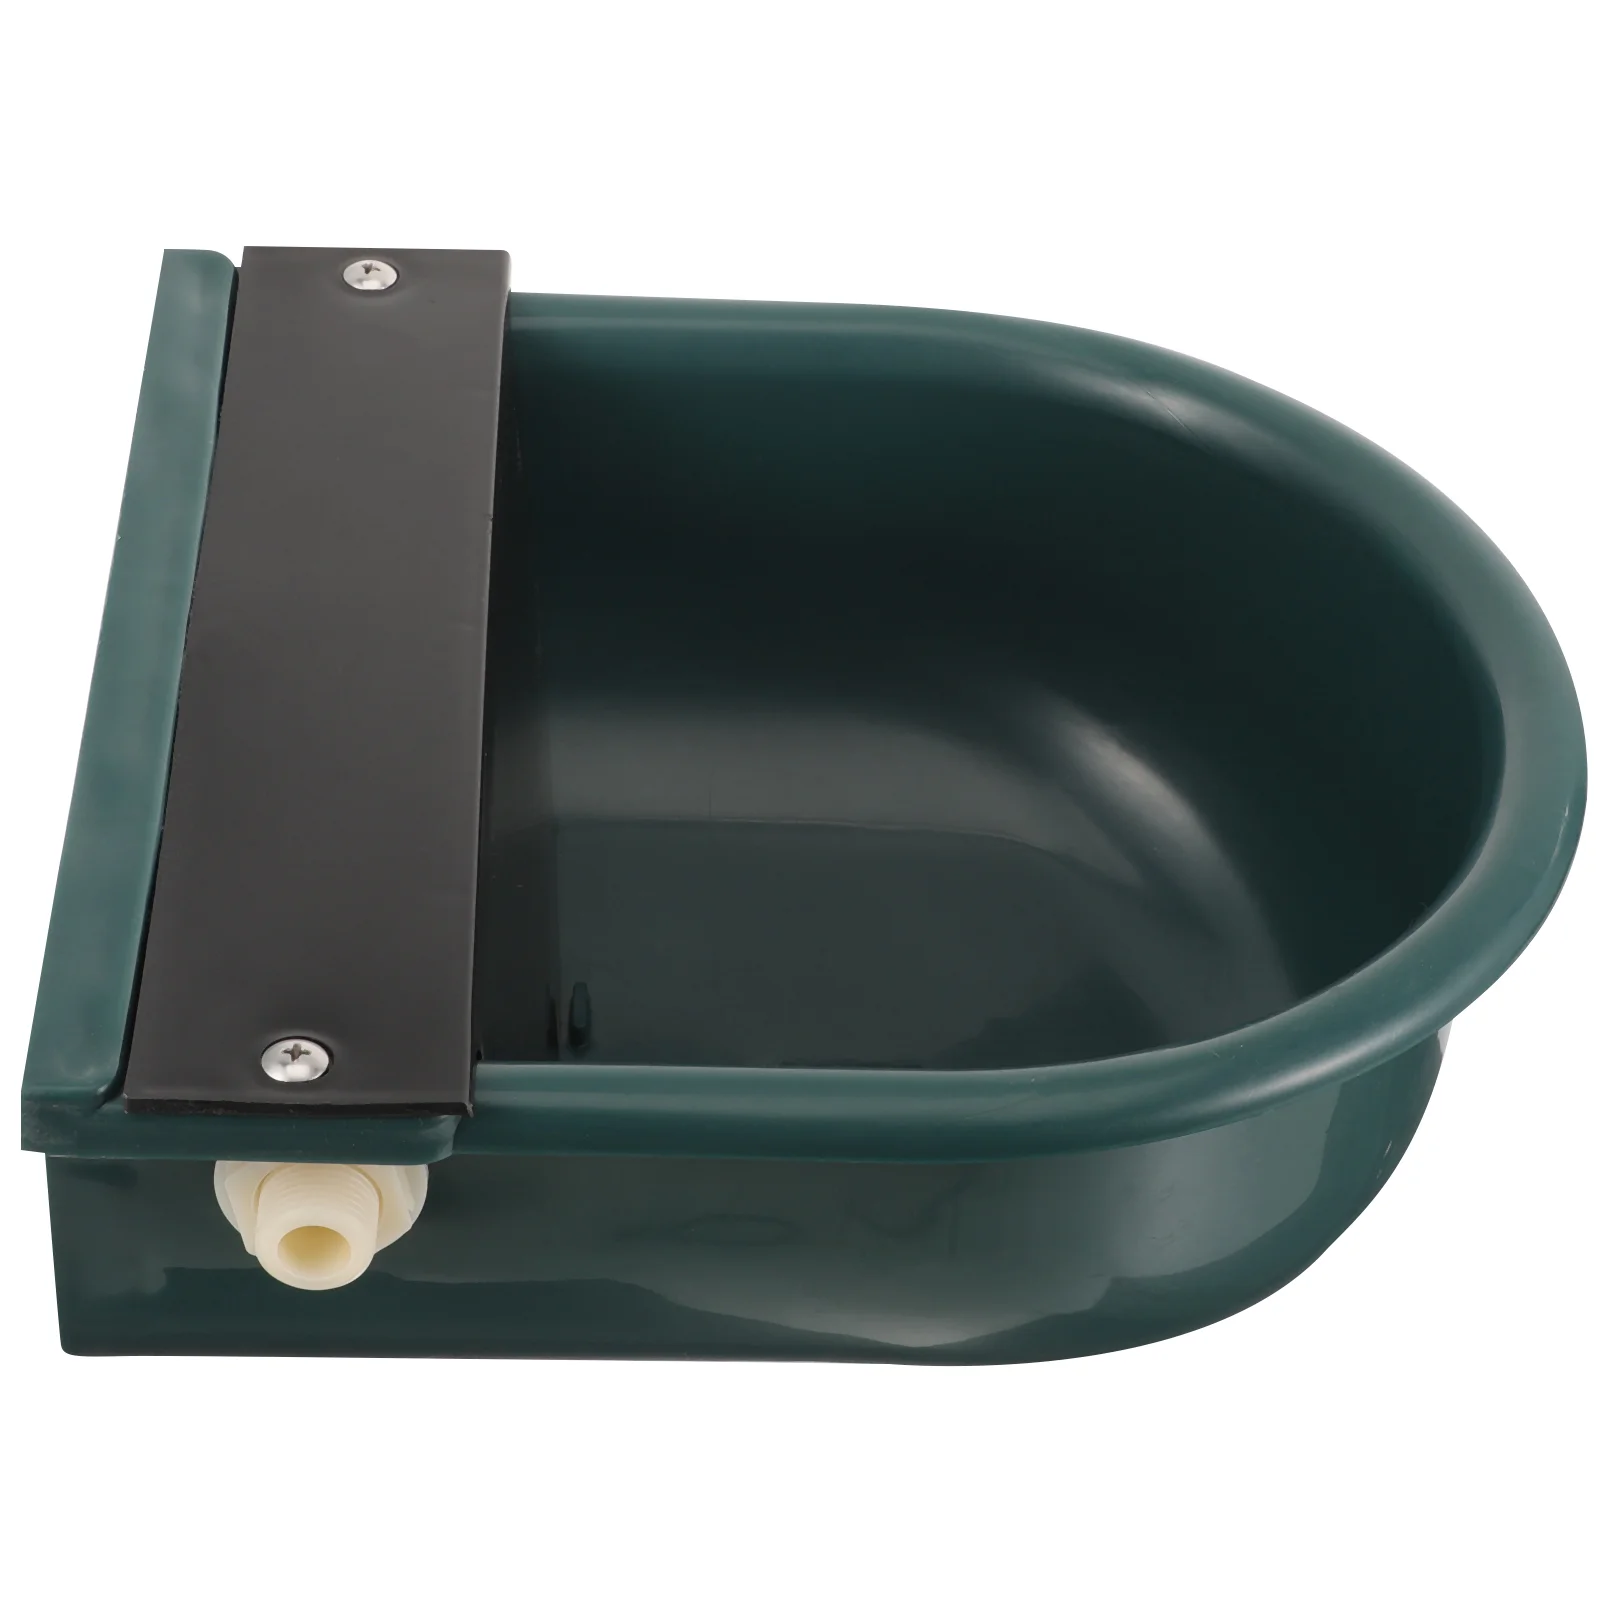 

Horse Cattle Drinker Farm Cow Drinking Fountain Goat Waterer Livestock Container Bucket Plastic Bowl Trough